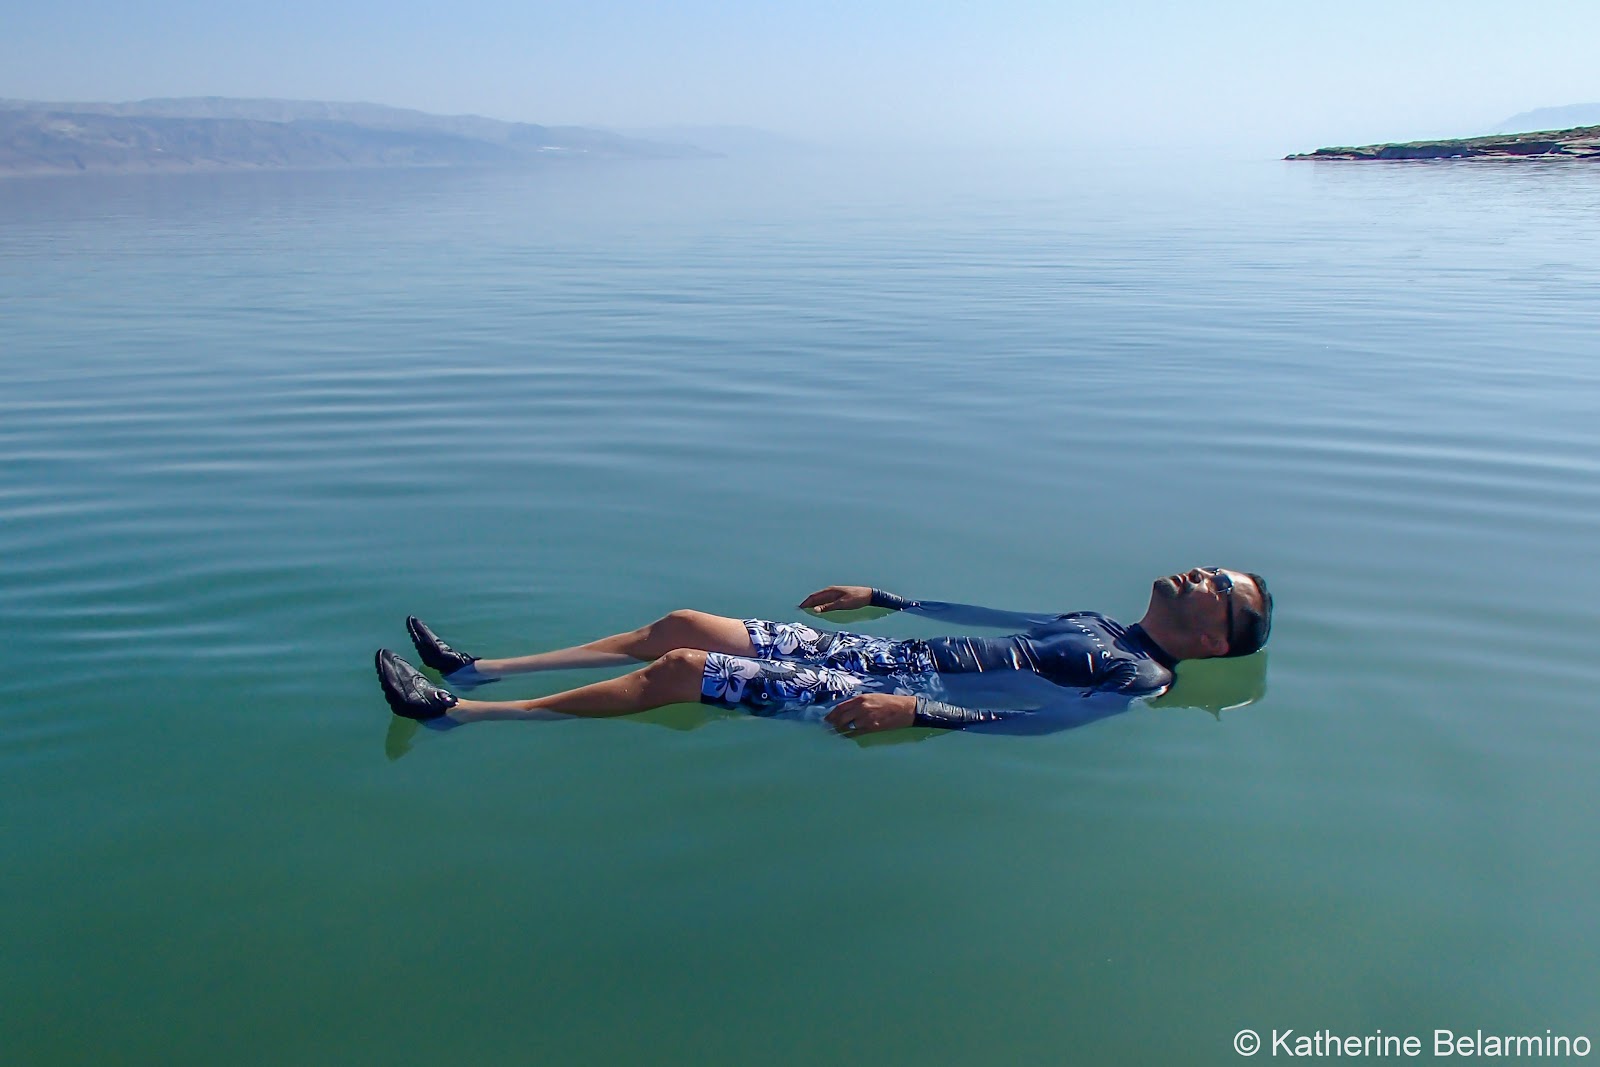 The experience of floating in the Dead Sea